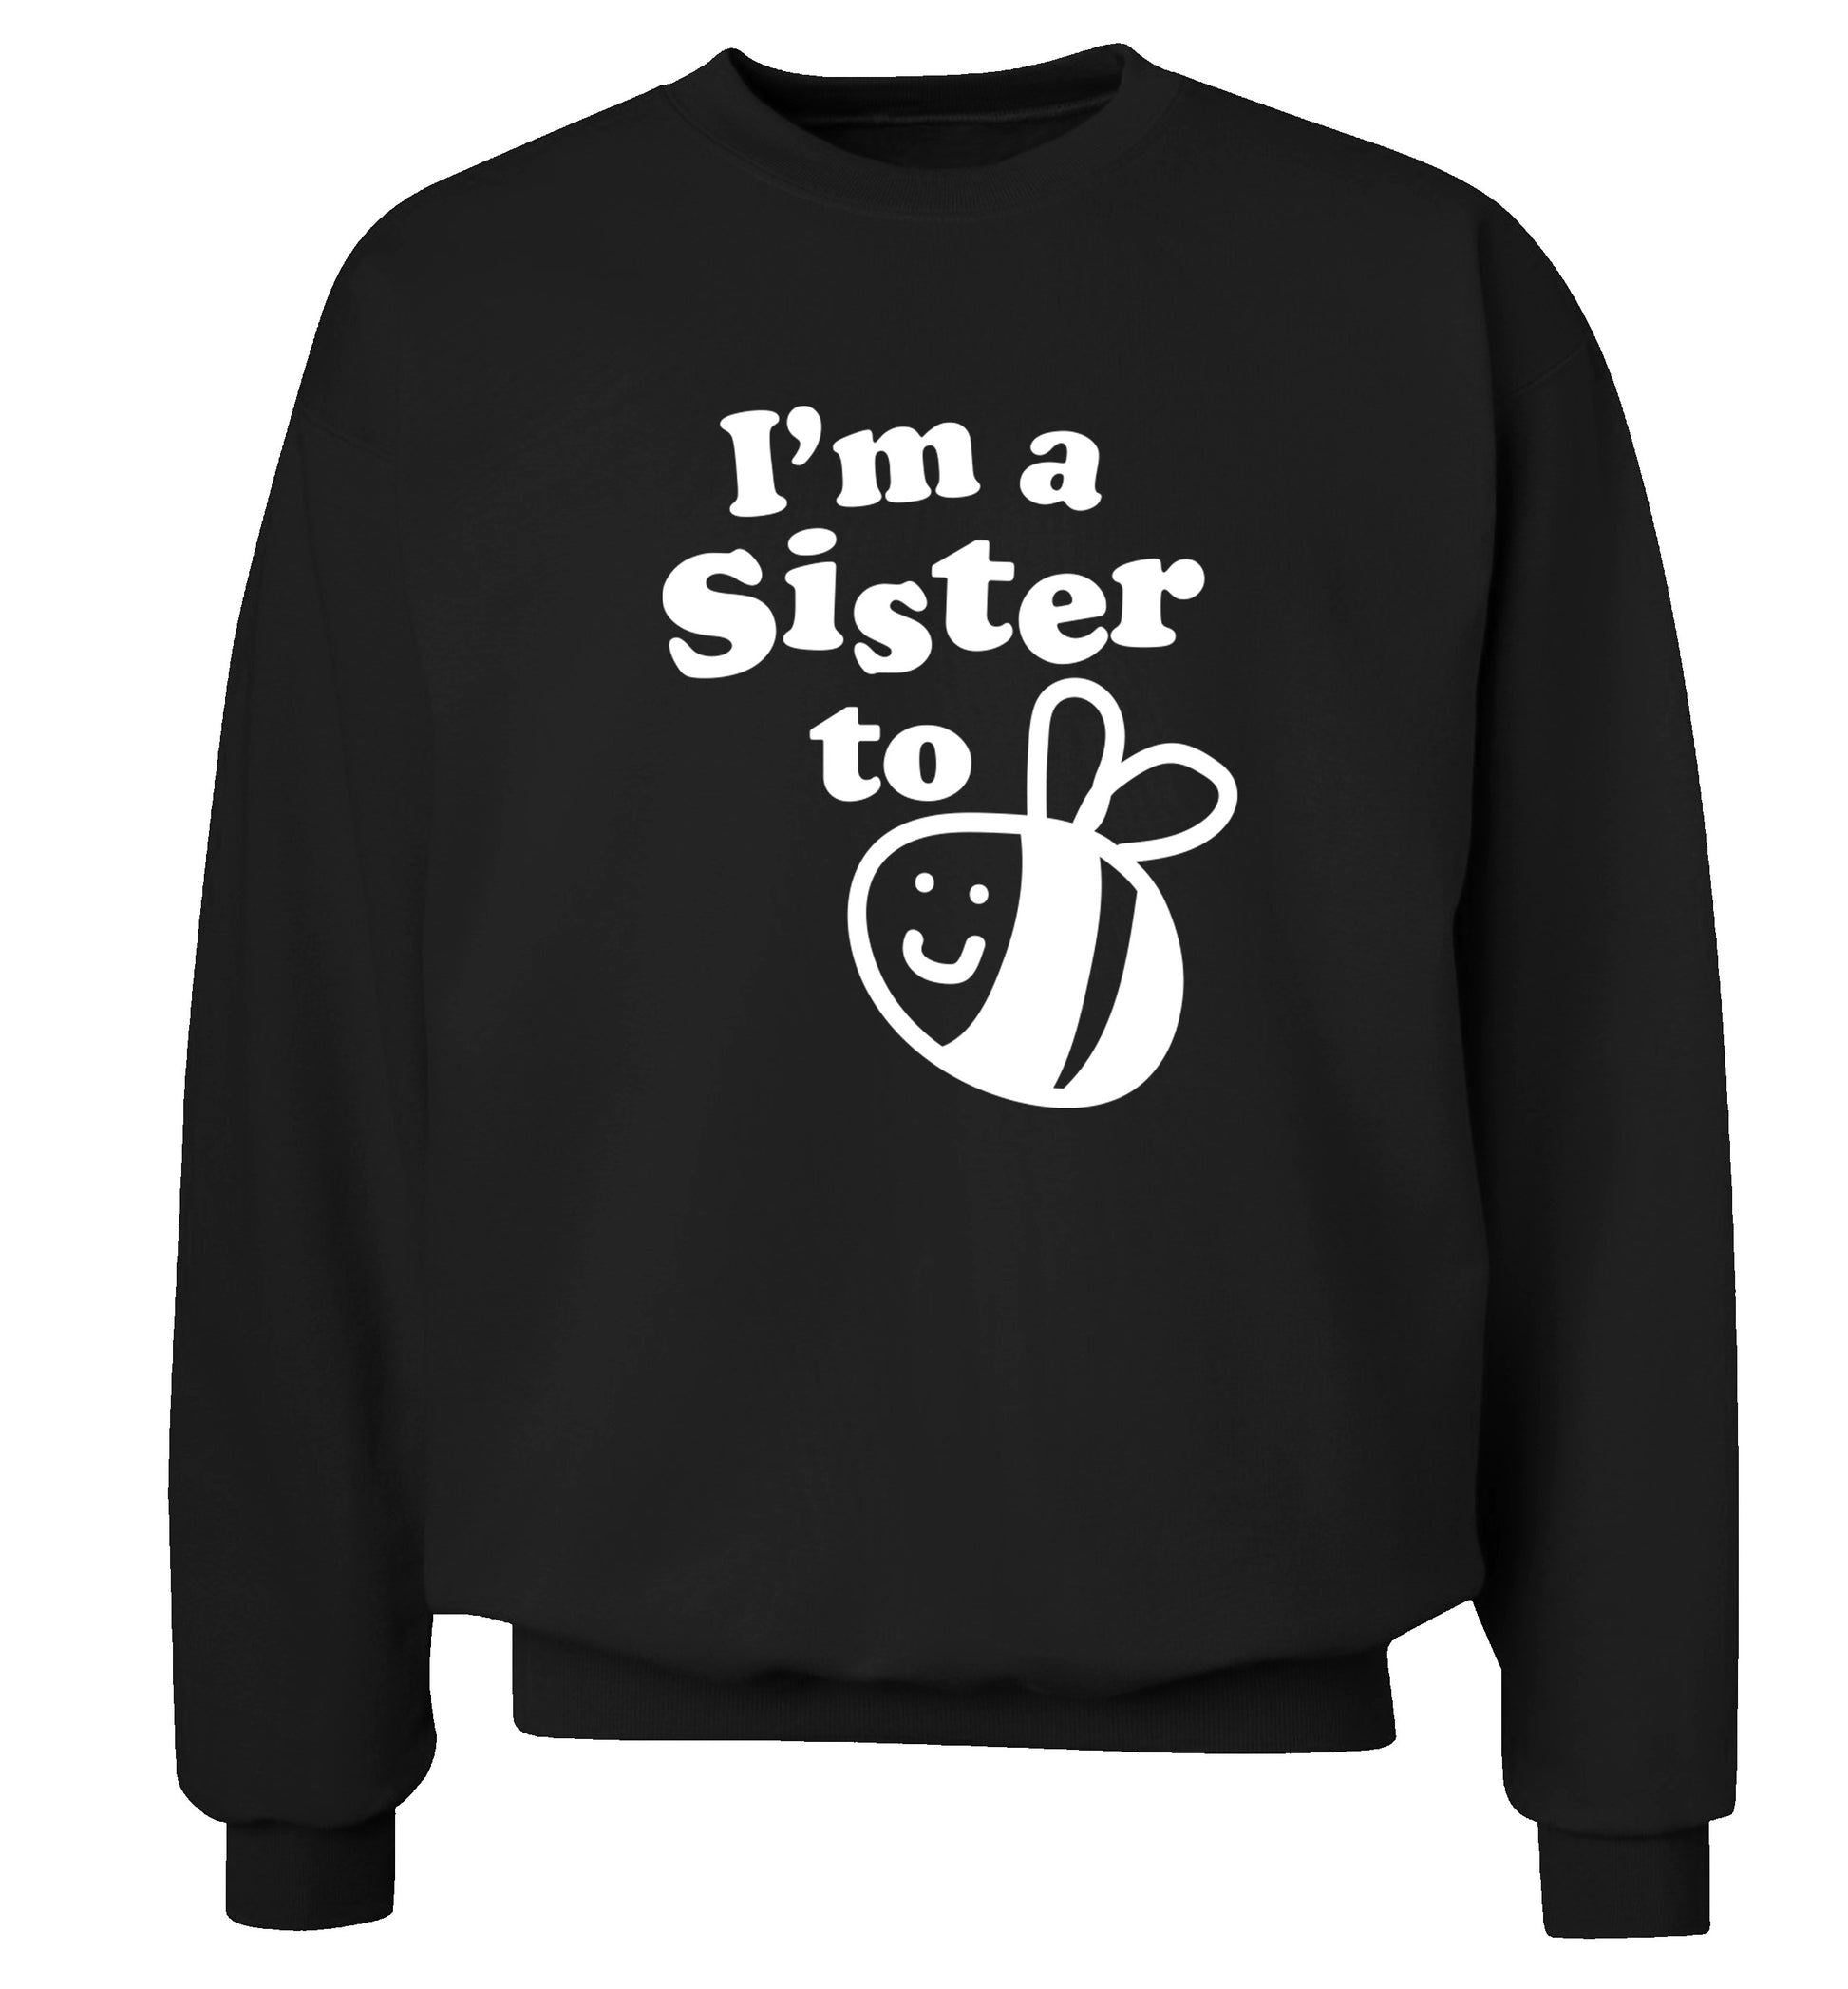 I'm a sister to be Adult's unisex black Sweater 2XL